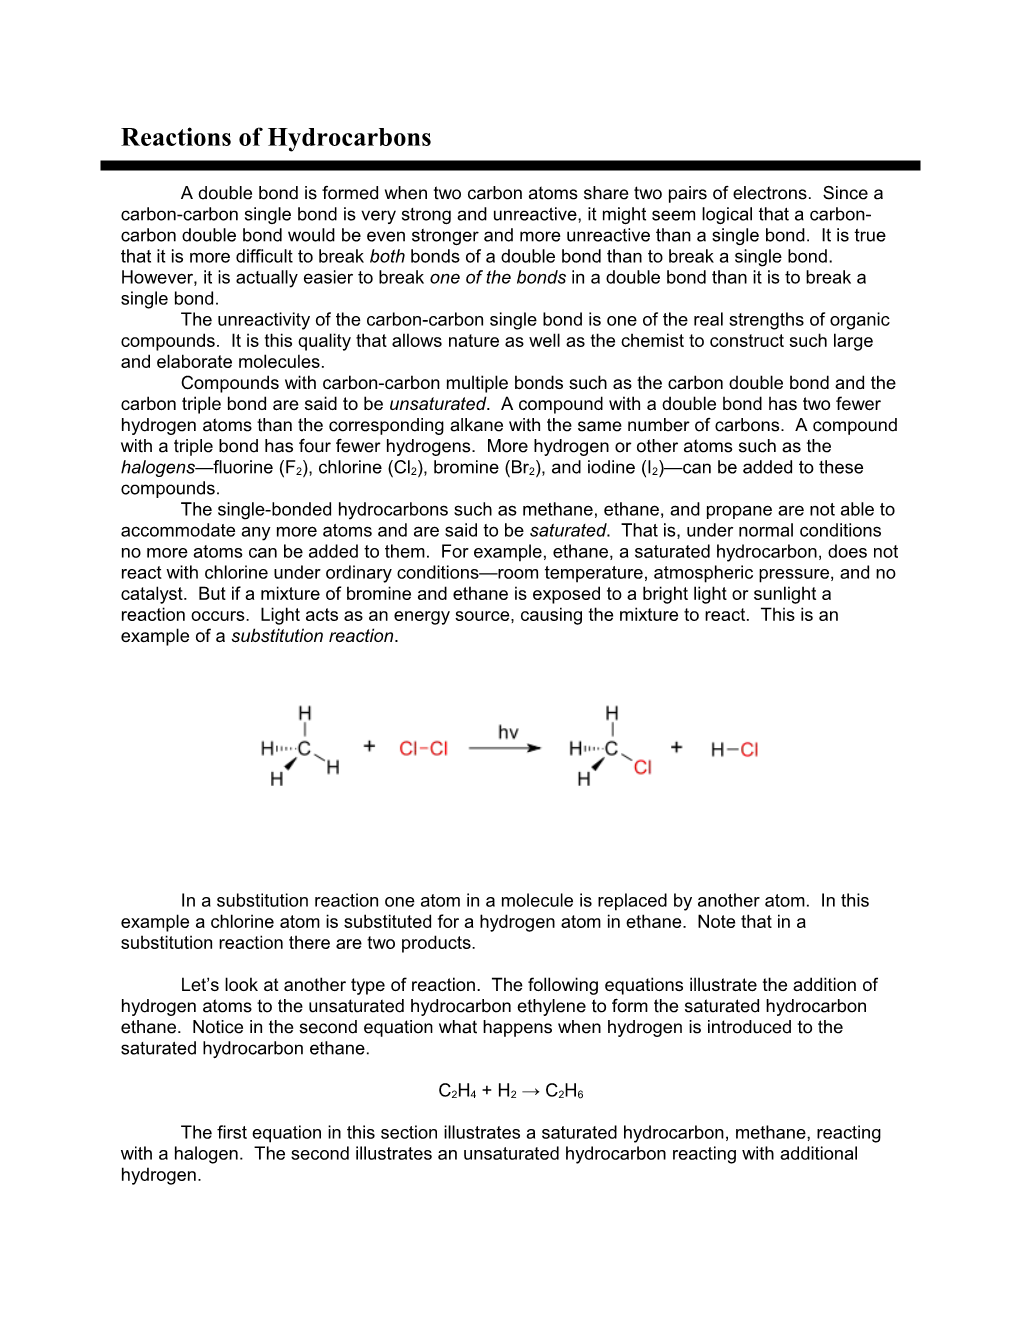 Reactions of Hydrocarbons